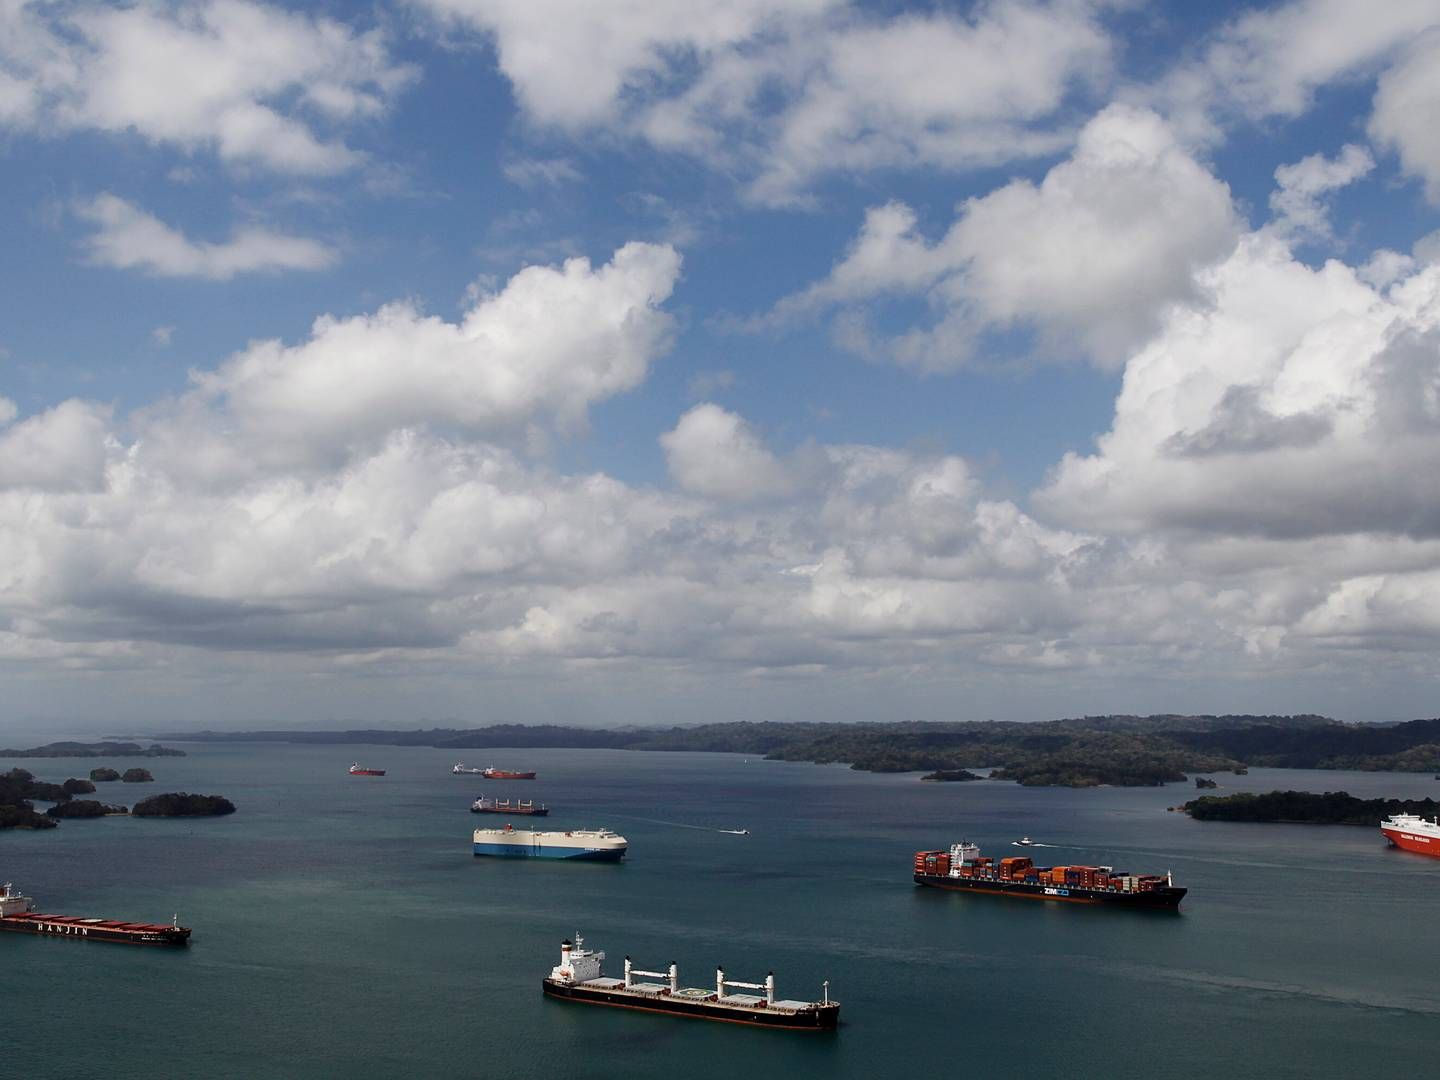 Although the drought in Gatun Lake, which supplies the Panama Canal with water, continues to cause problems for the canal's traffic, the number of ships queuing is lower than last year. | Foto: Carlos Jasso/Reuters/Ritzau Scanpix